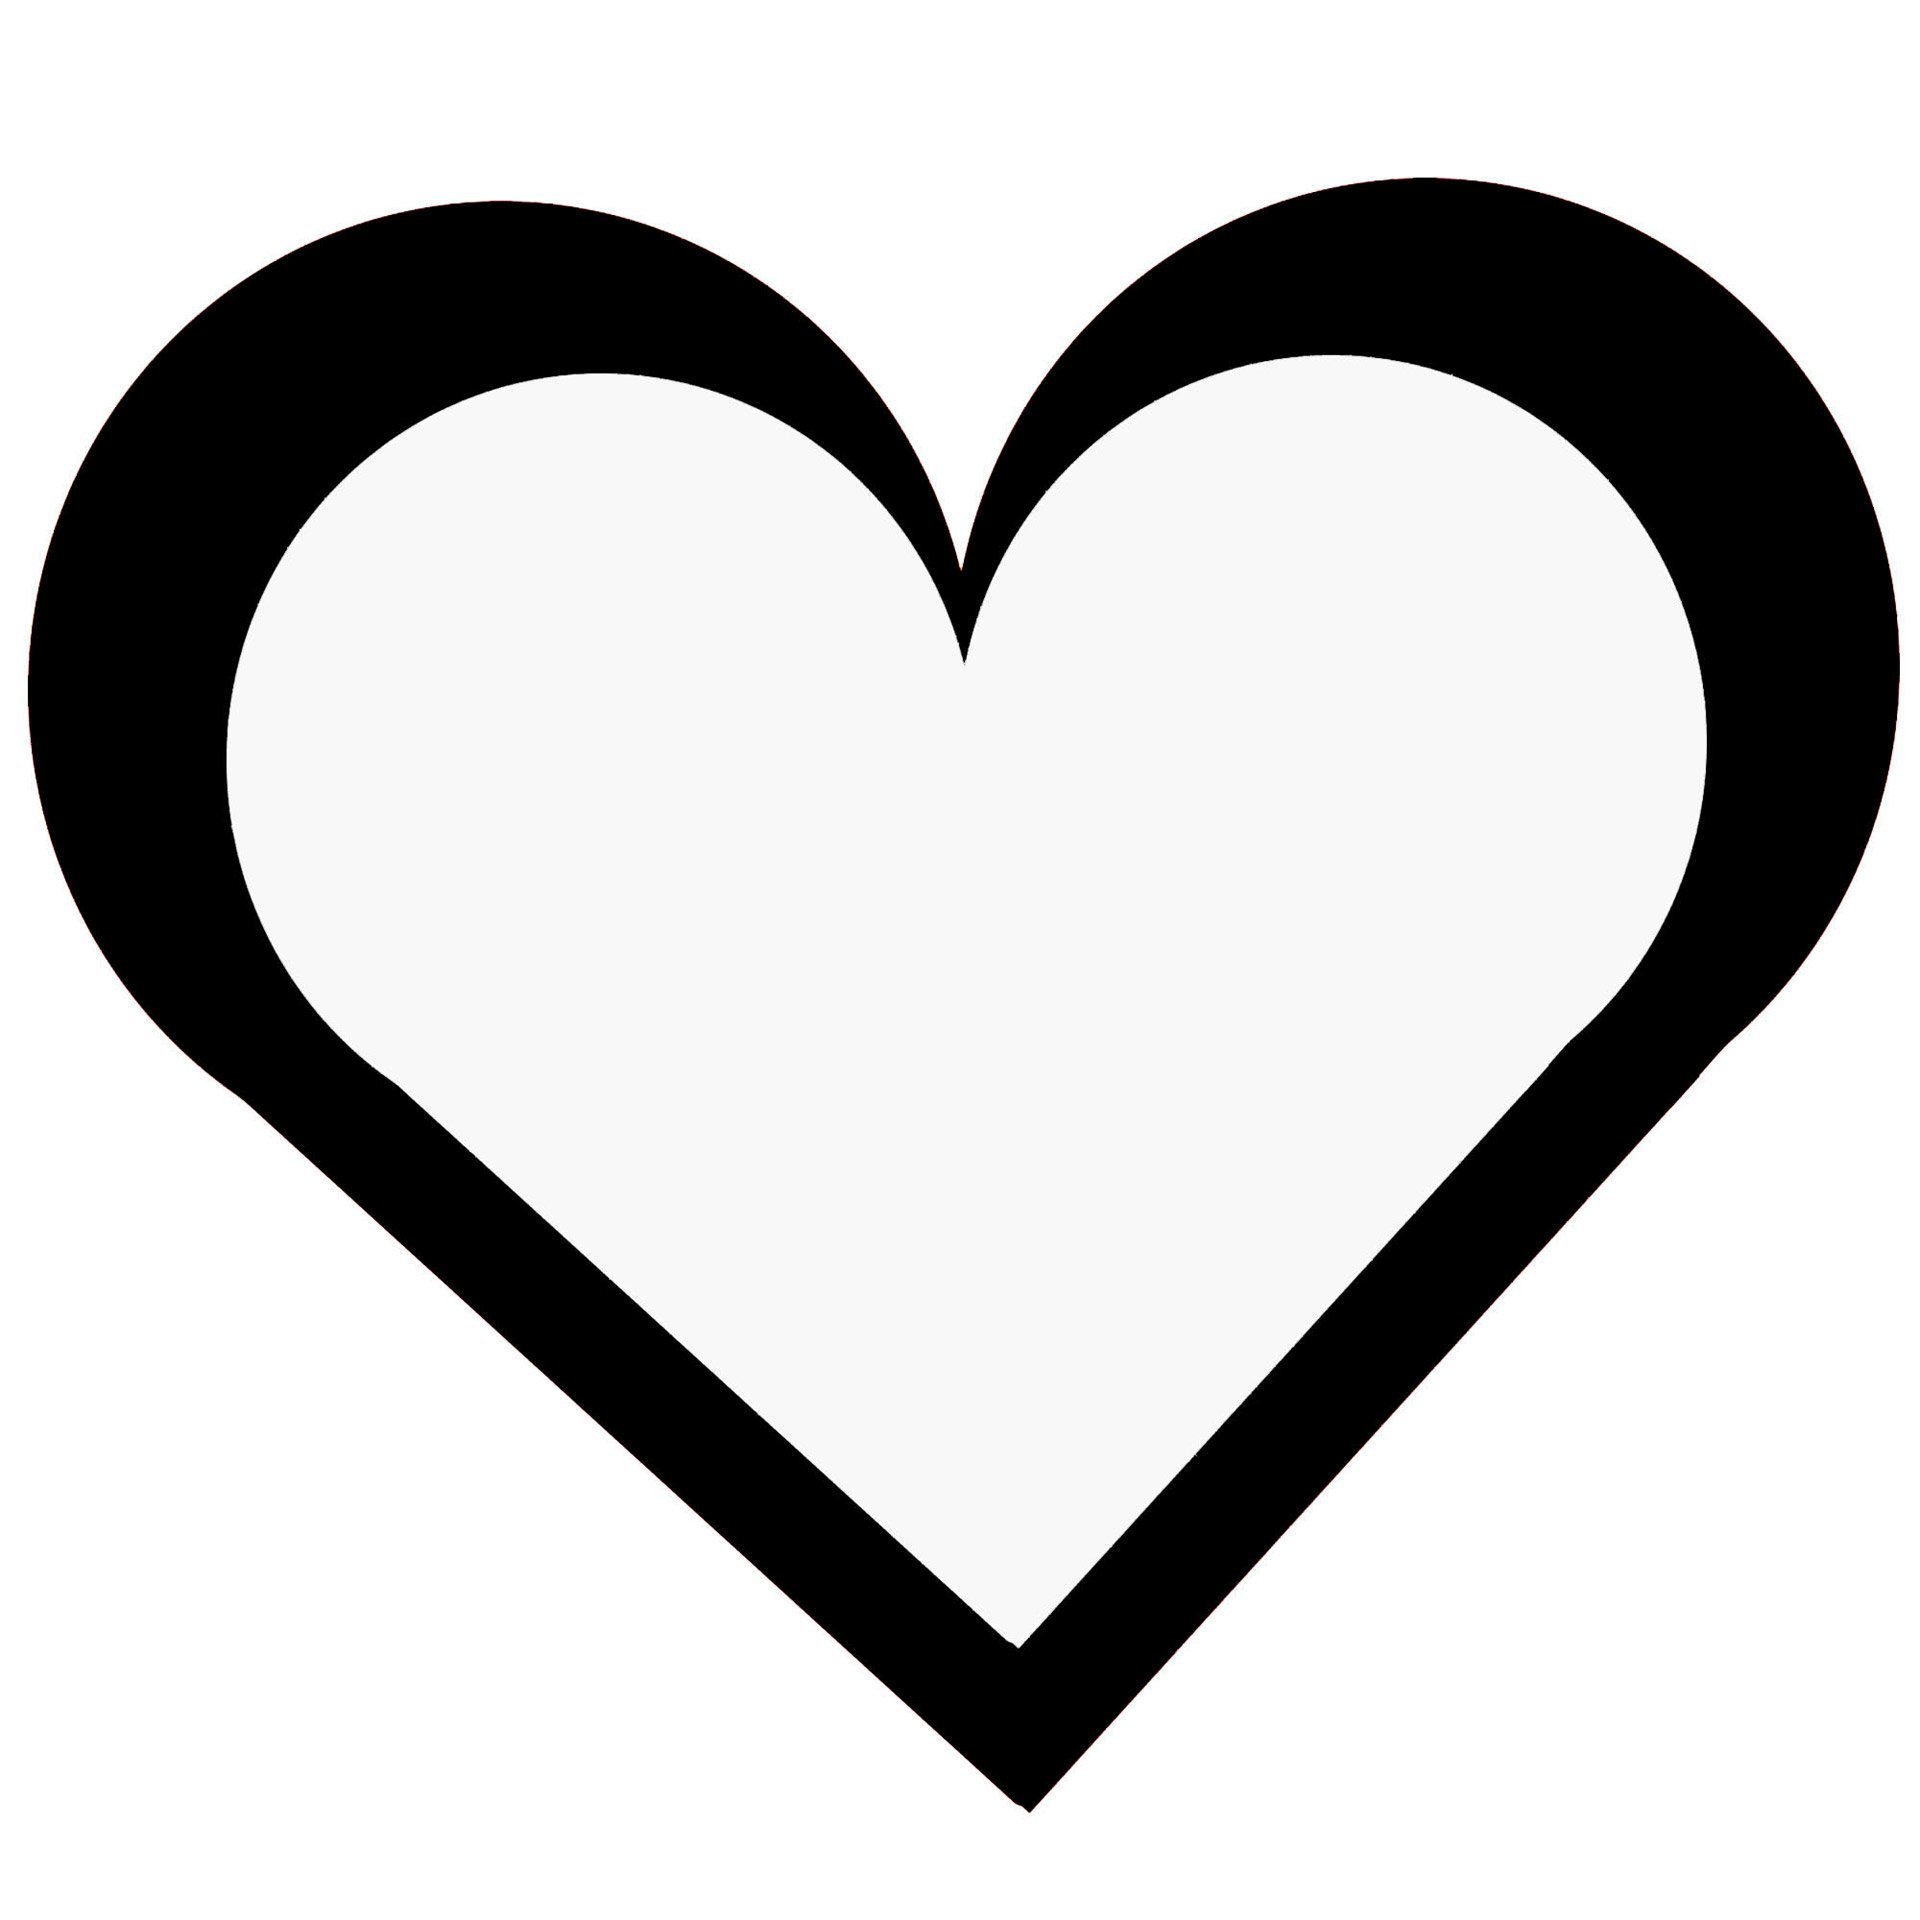 Heart Outline Black And White Basic Heart Outline By K Whiteford1920 X